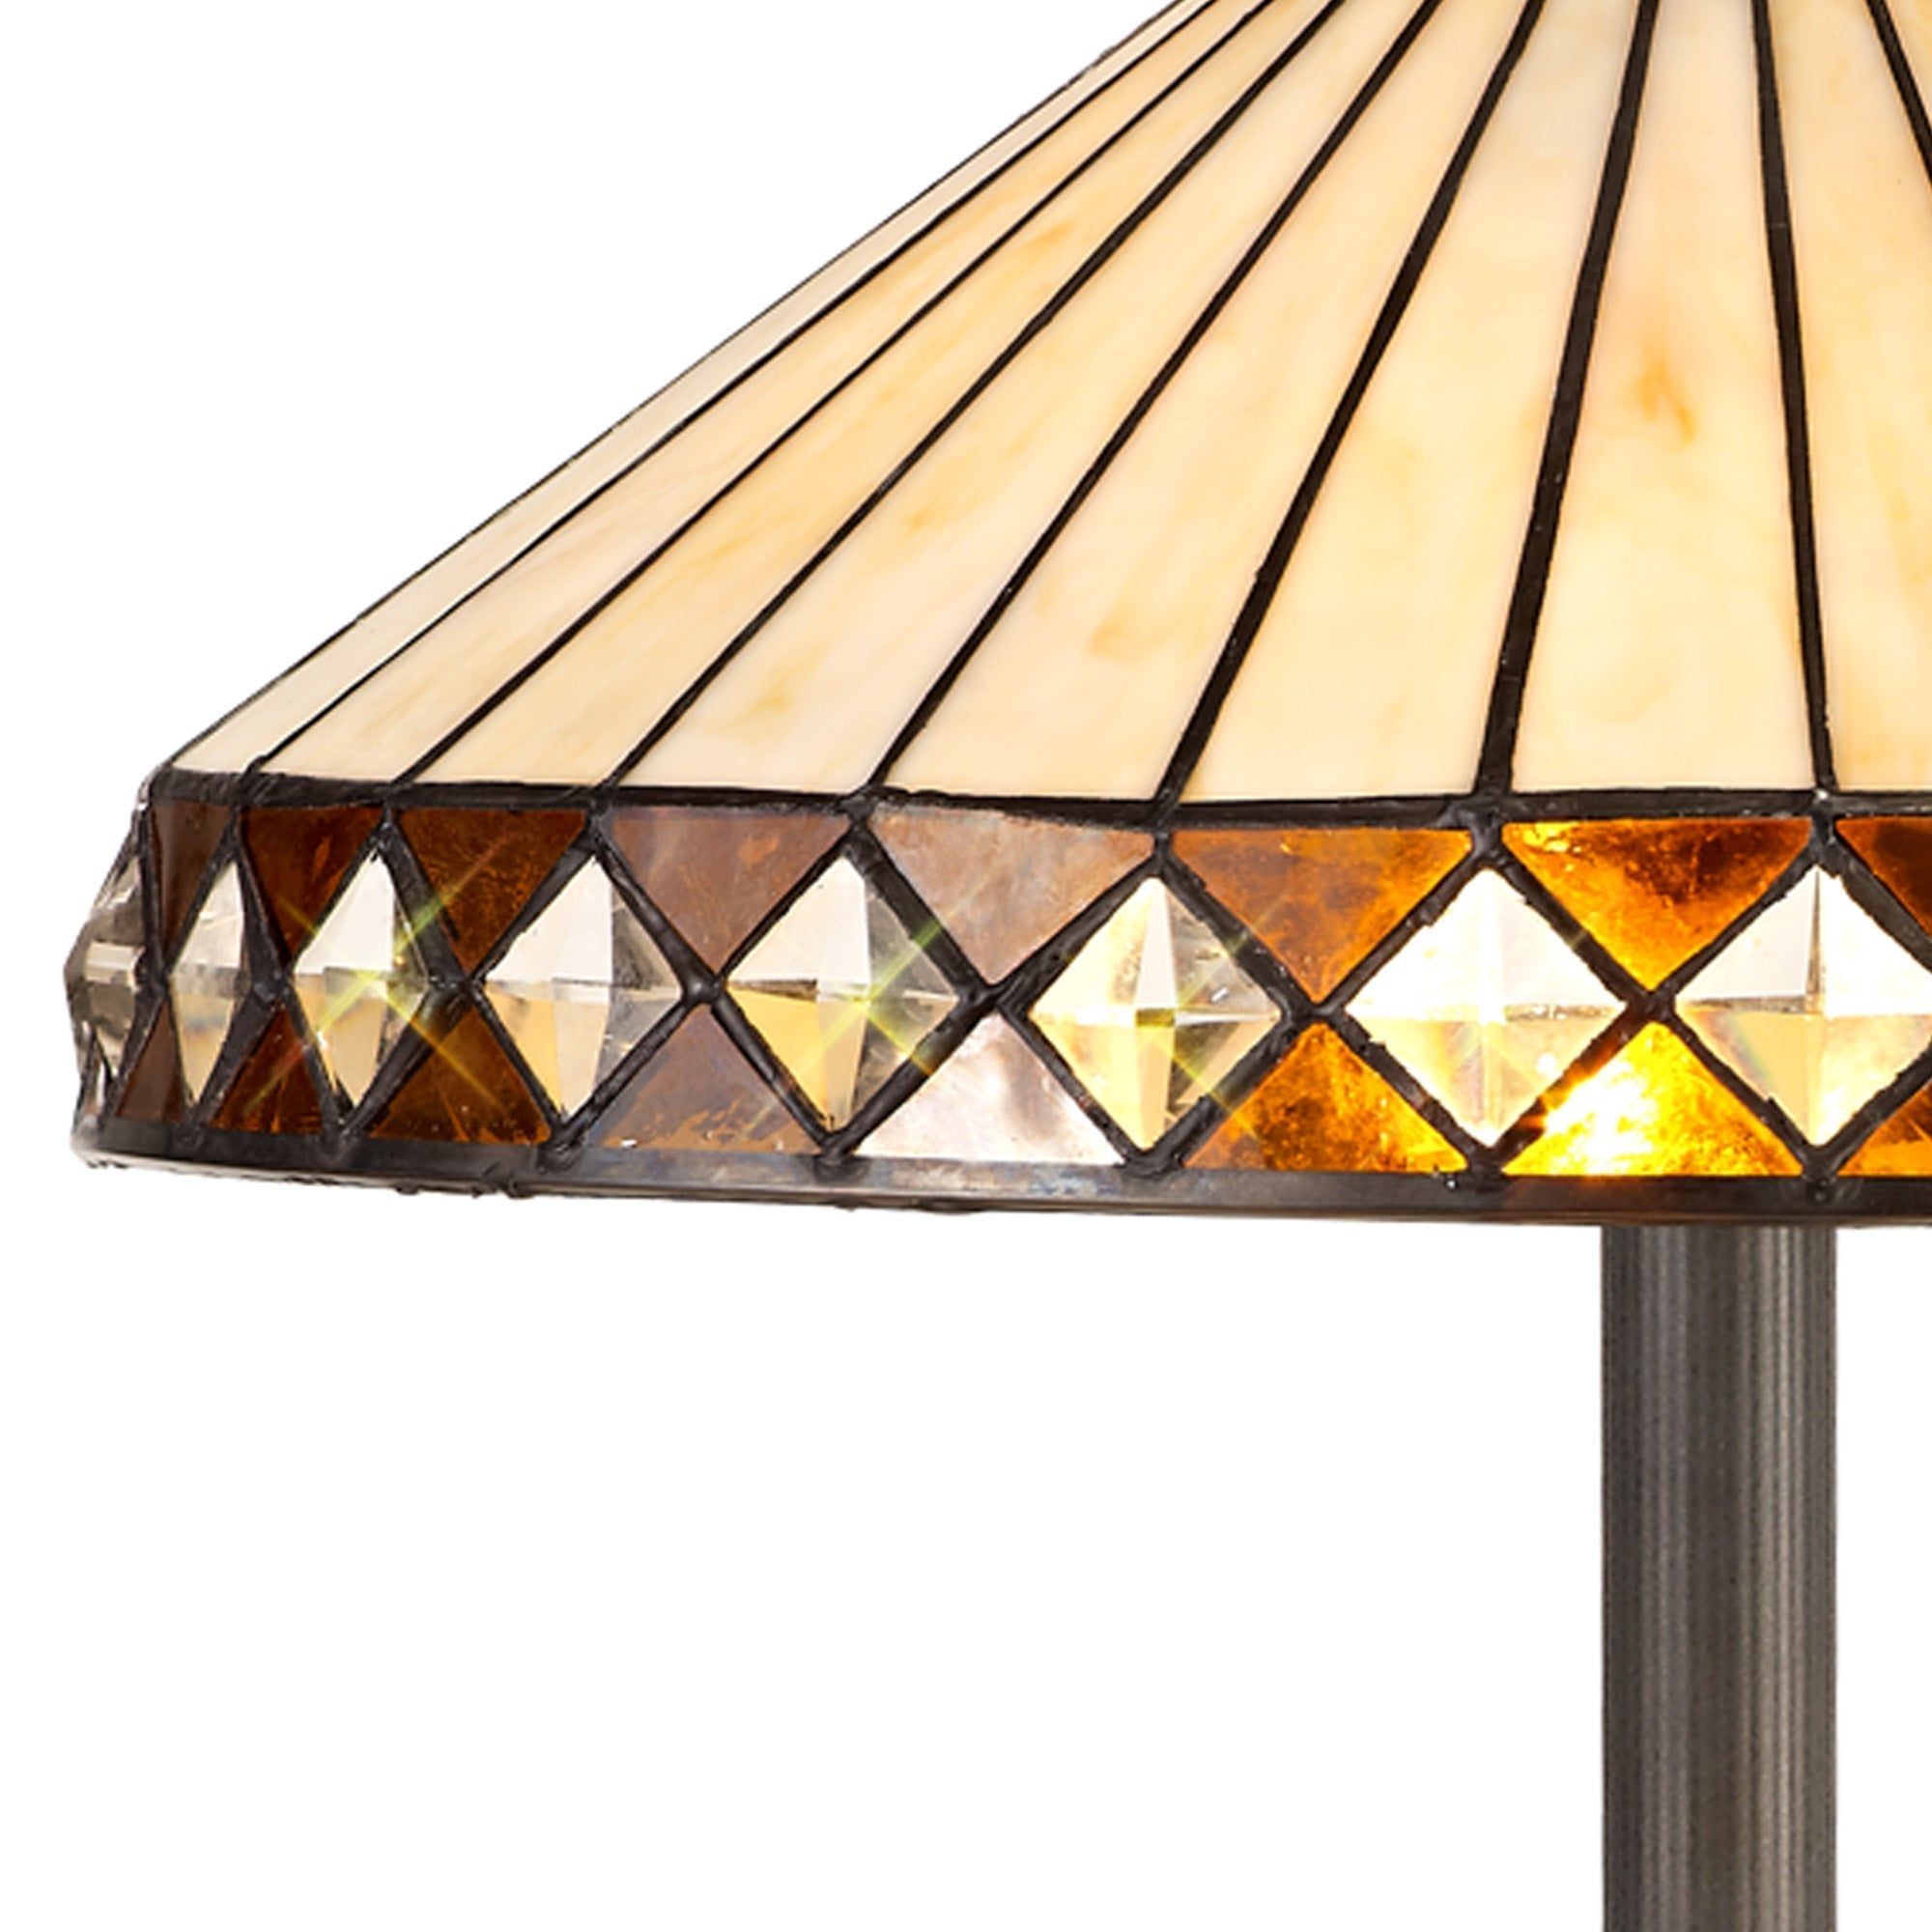 Isrmian 2 Light Leaf/Octagonal/Stepped Design Floor Lamp E27 With 40cm Tiffany Shade, Amber/Cream/Crystal/Aged Antique Brass